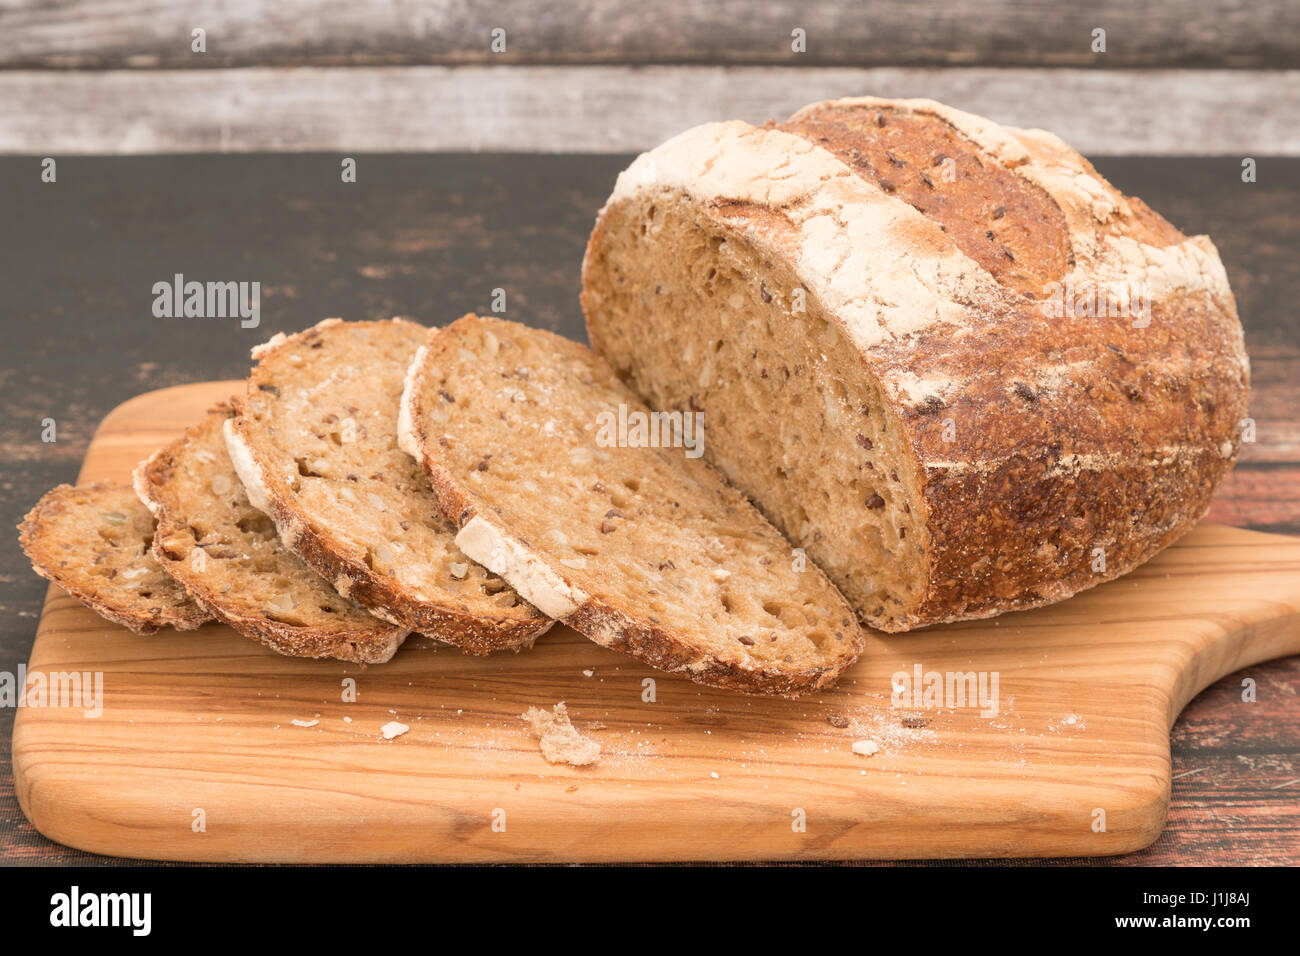 A sourdough bread with slices Stock Photo